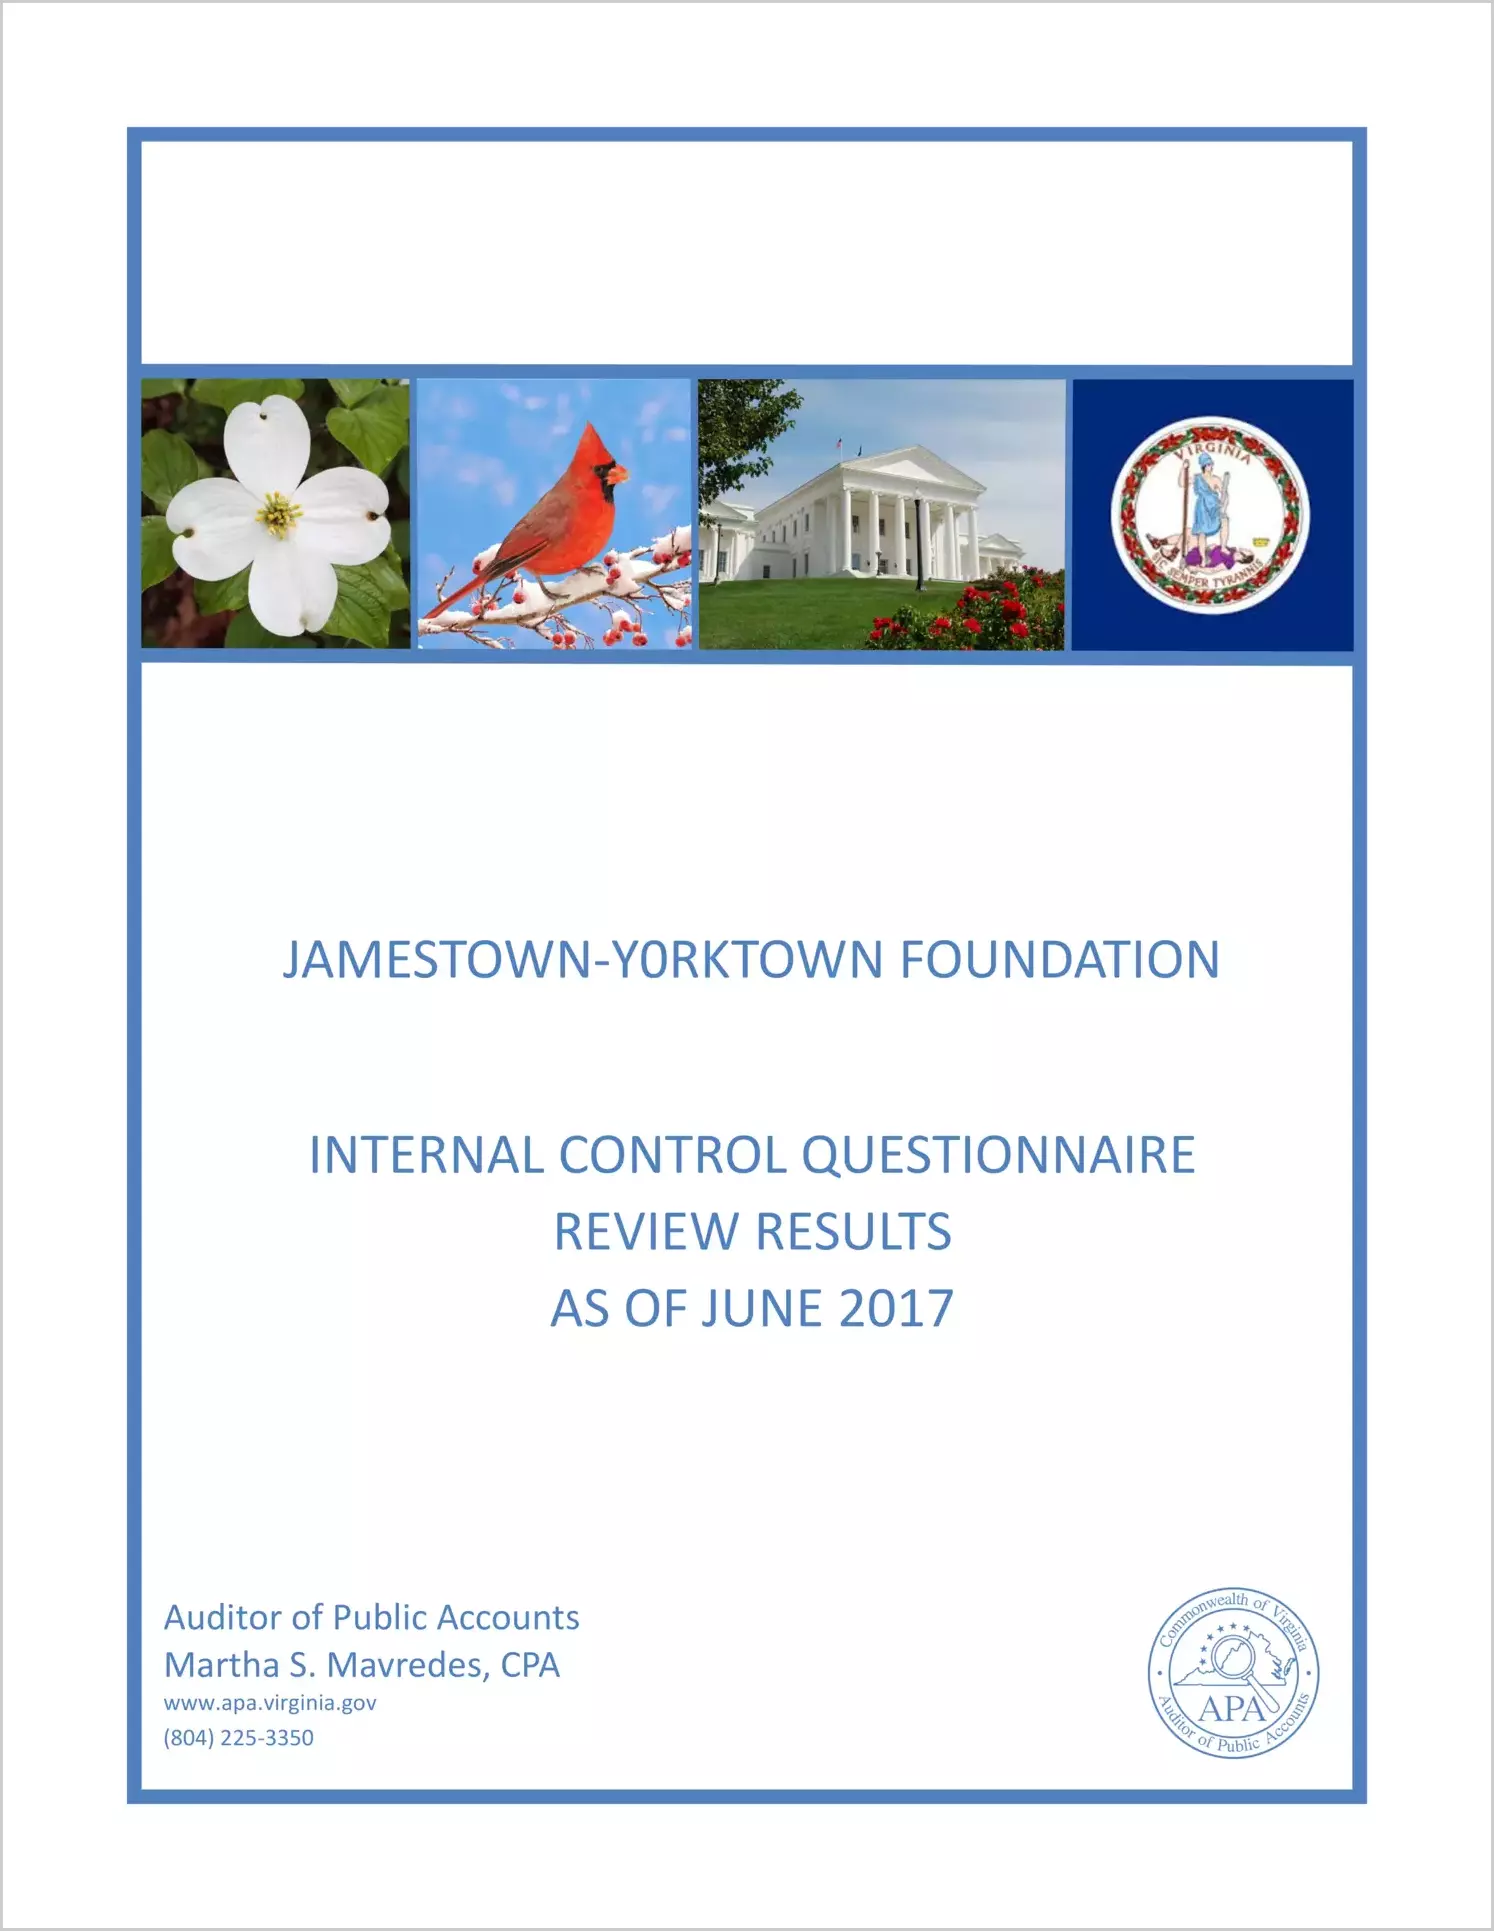 Jamestown-Yorktown Foundation Internal Control Questionnaire Review Results as of June 2017